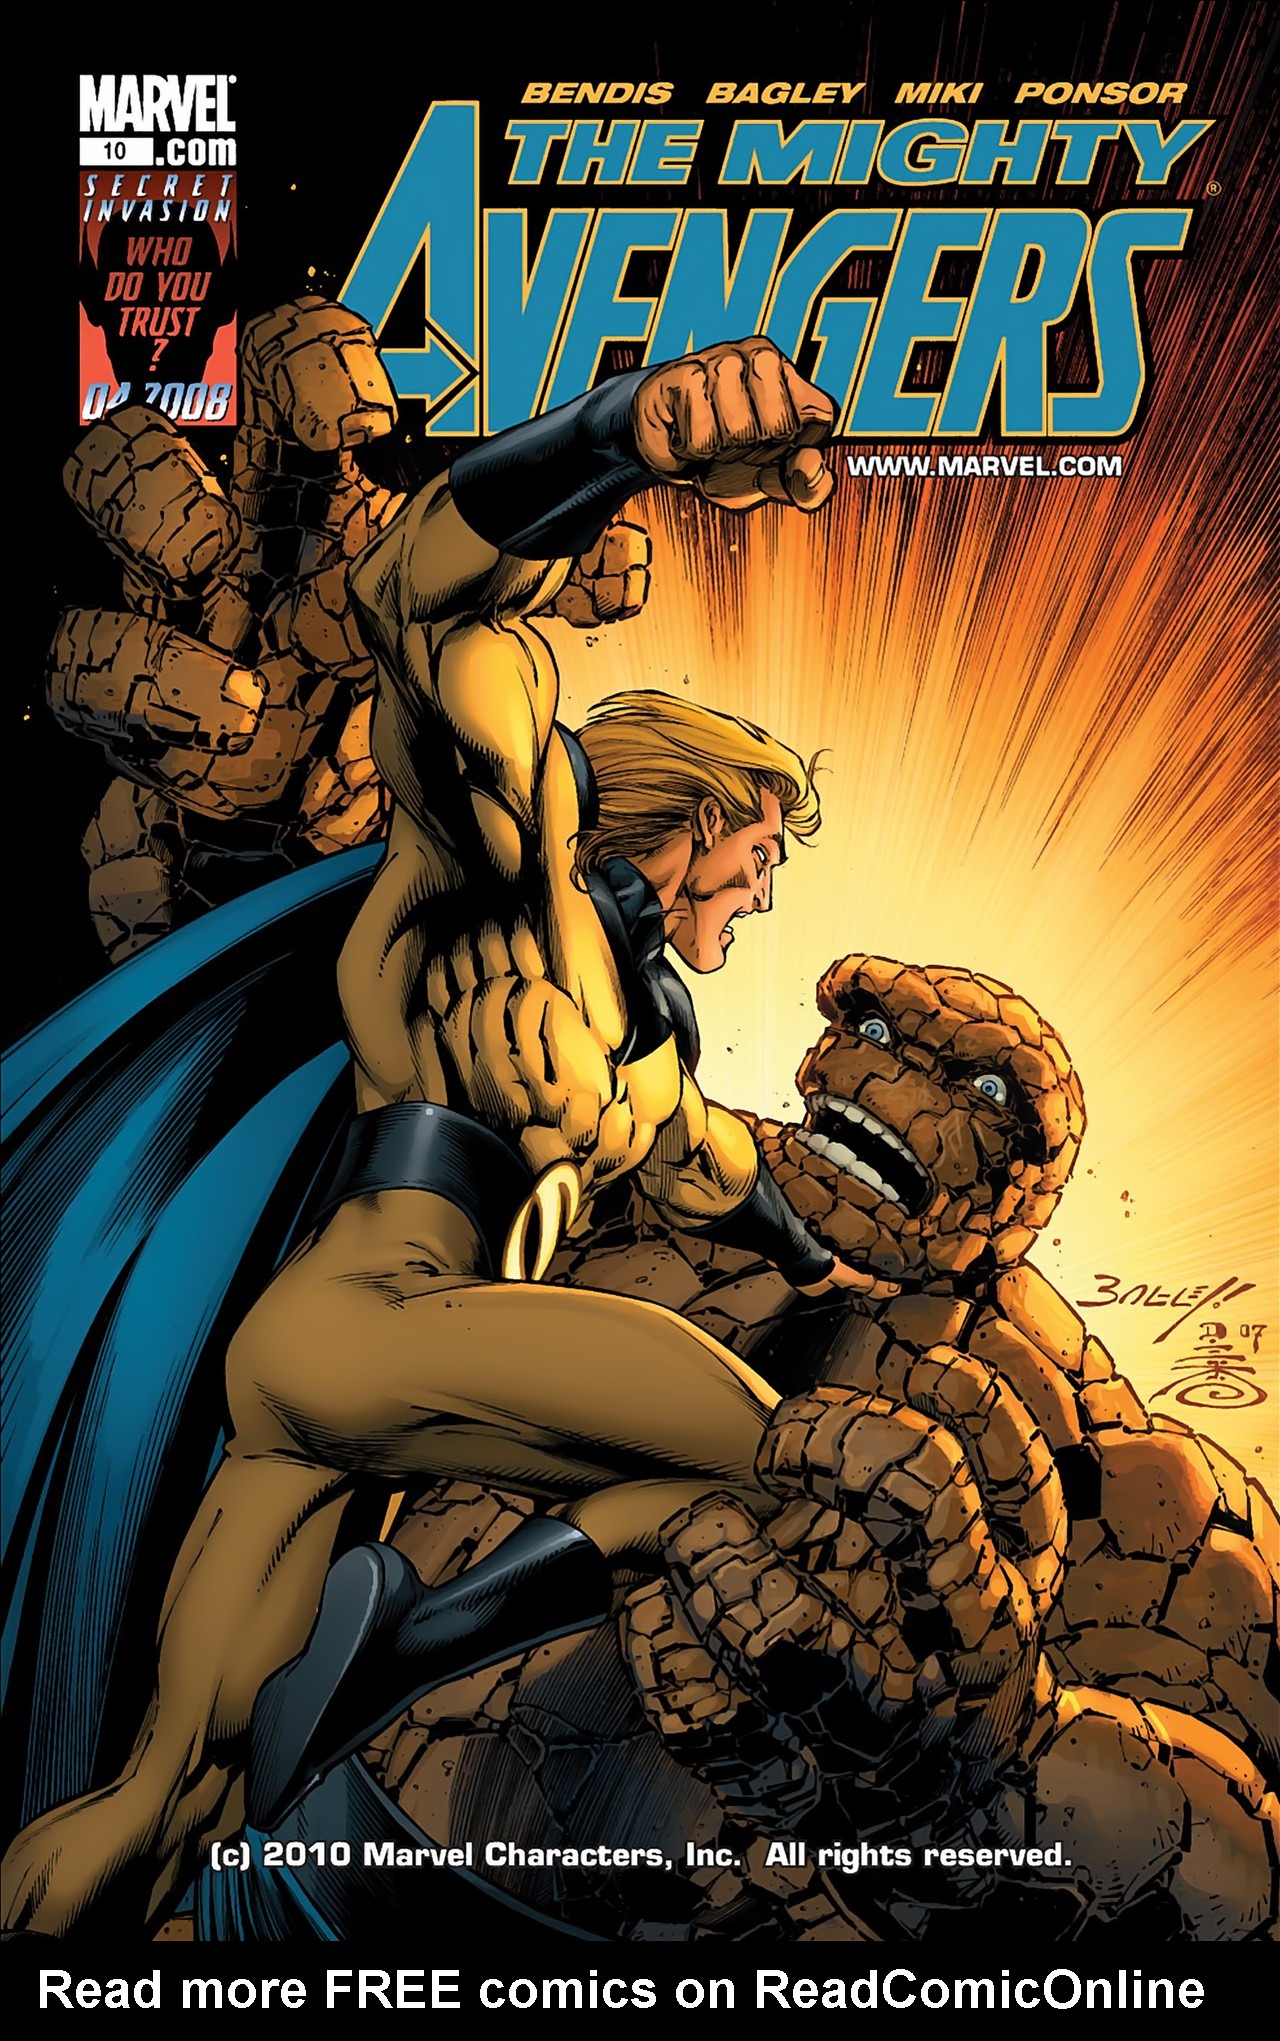 Read online The Mighty Avengers comic -  Issue #10 - 1